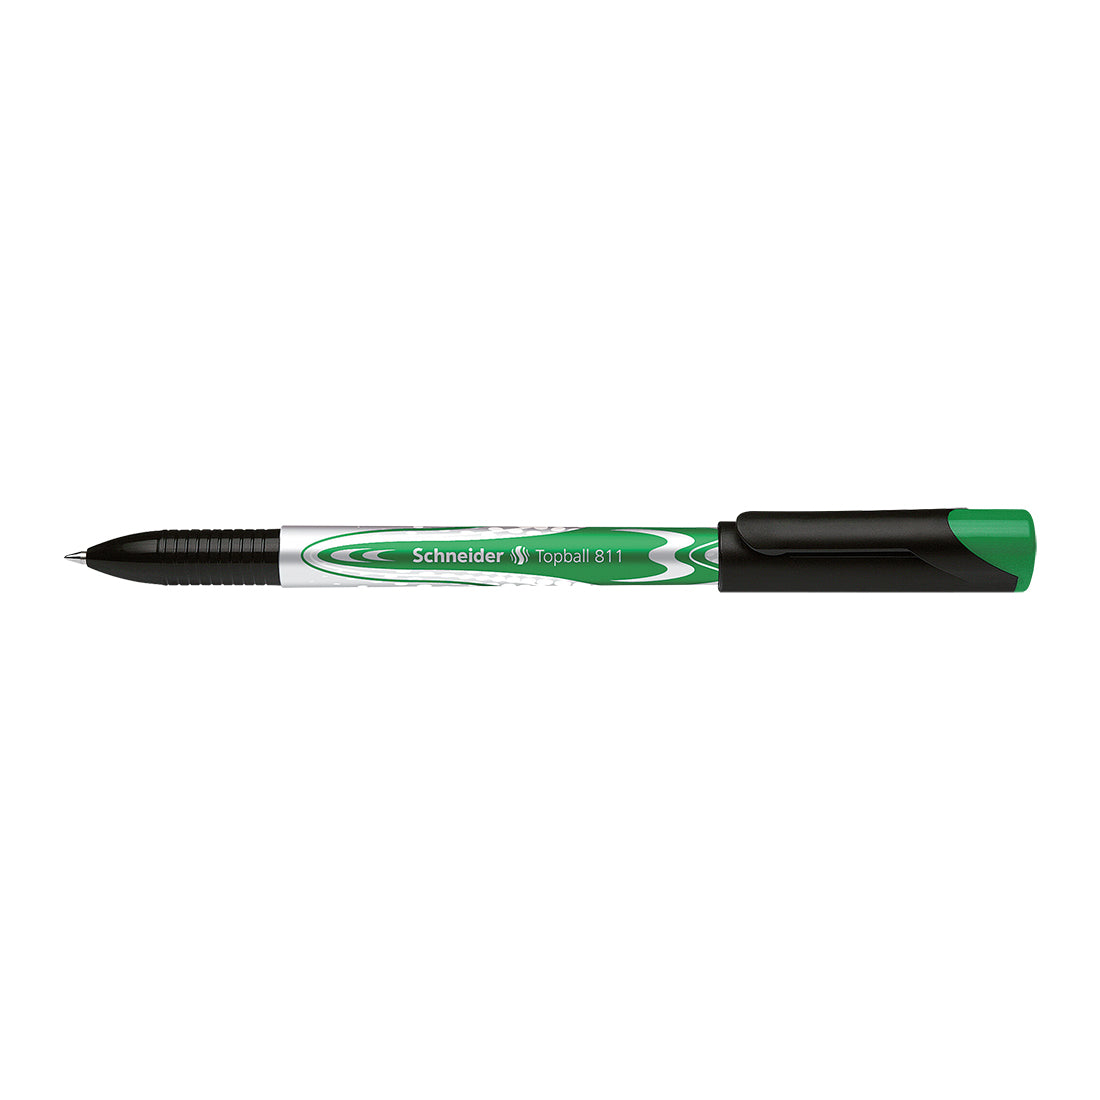 Topball 811 Rollerball 0.5mm, Box of 10#ink-color_green